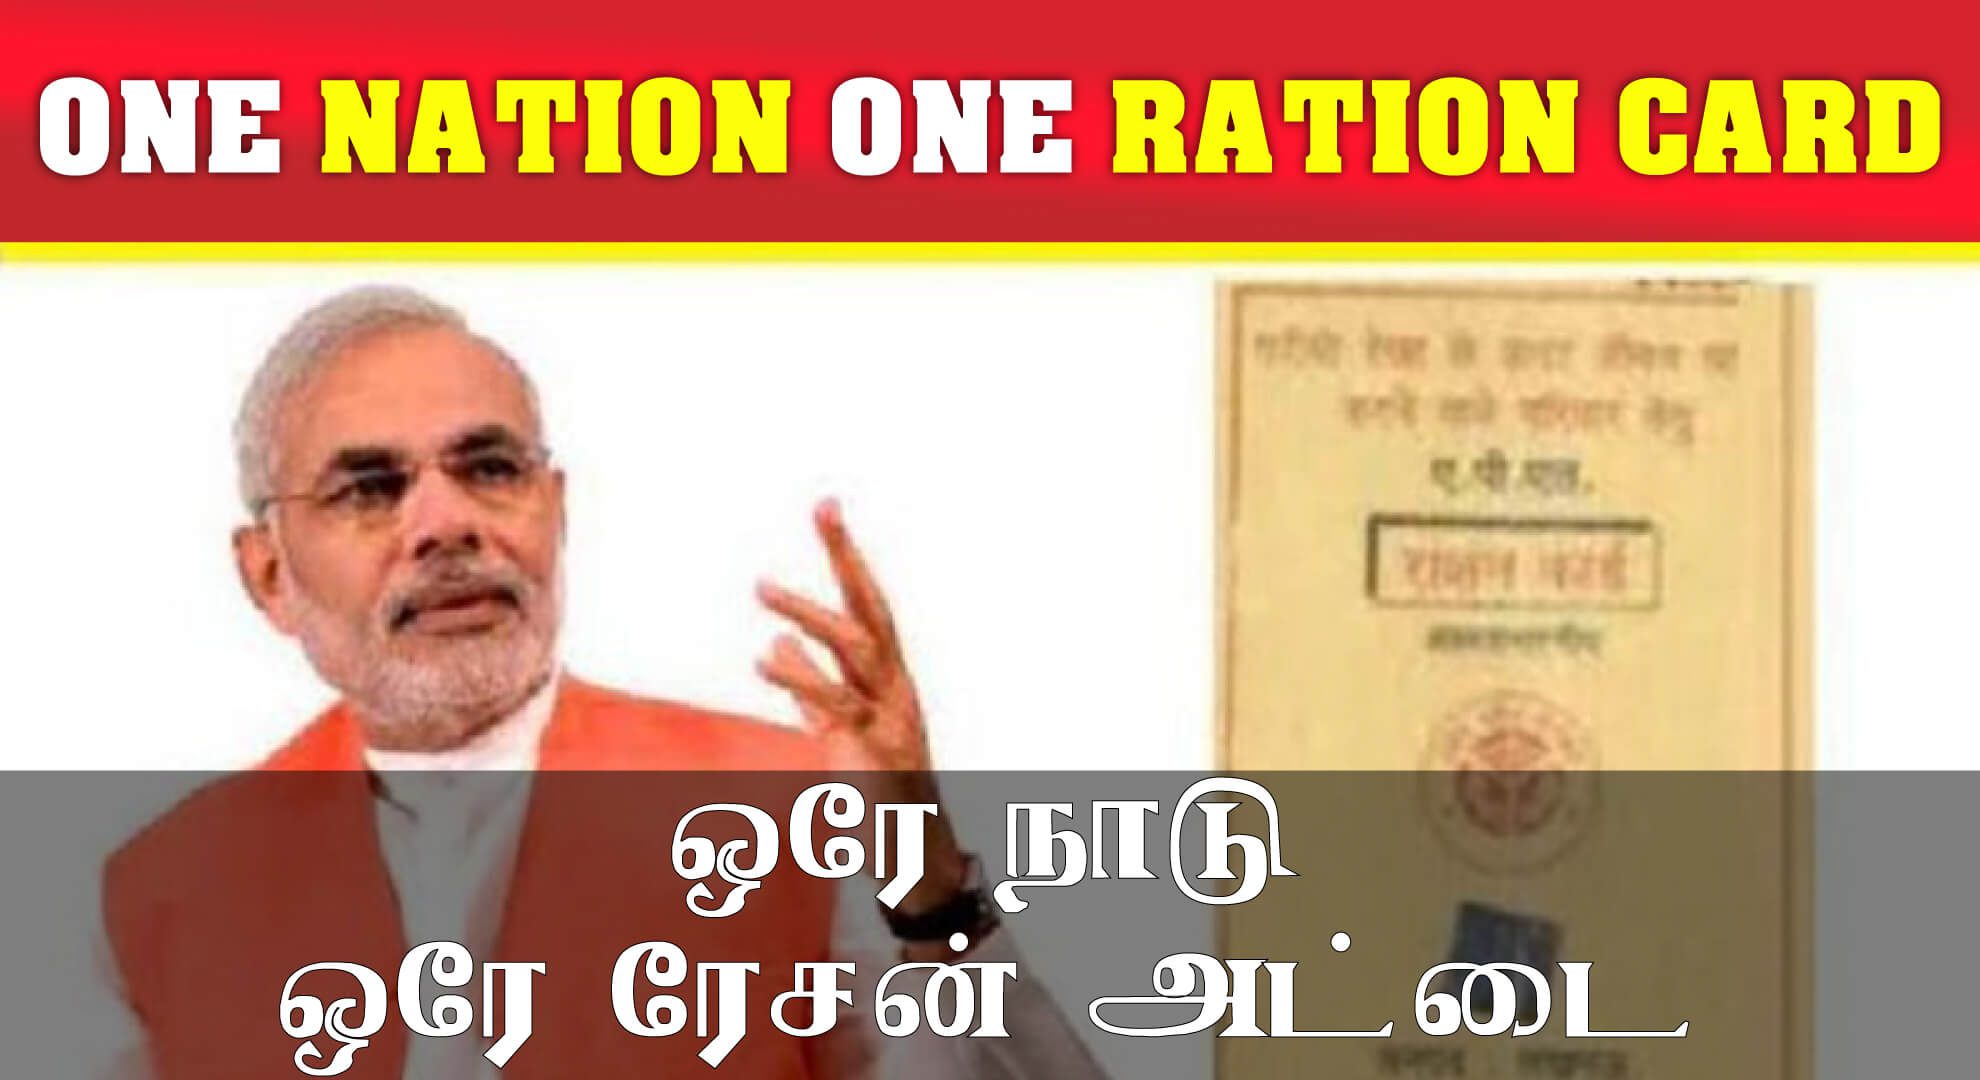 One nation one ration card | New ration card format released